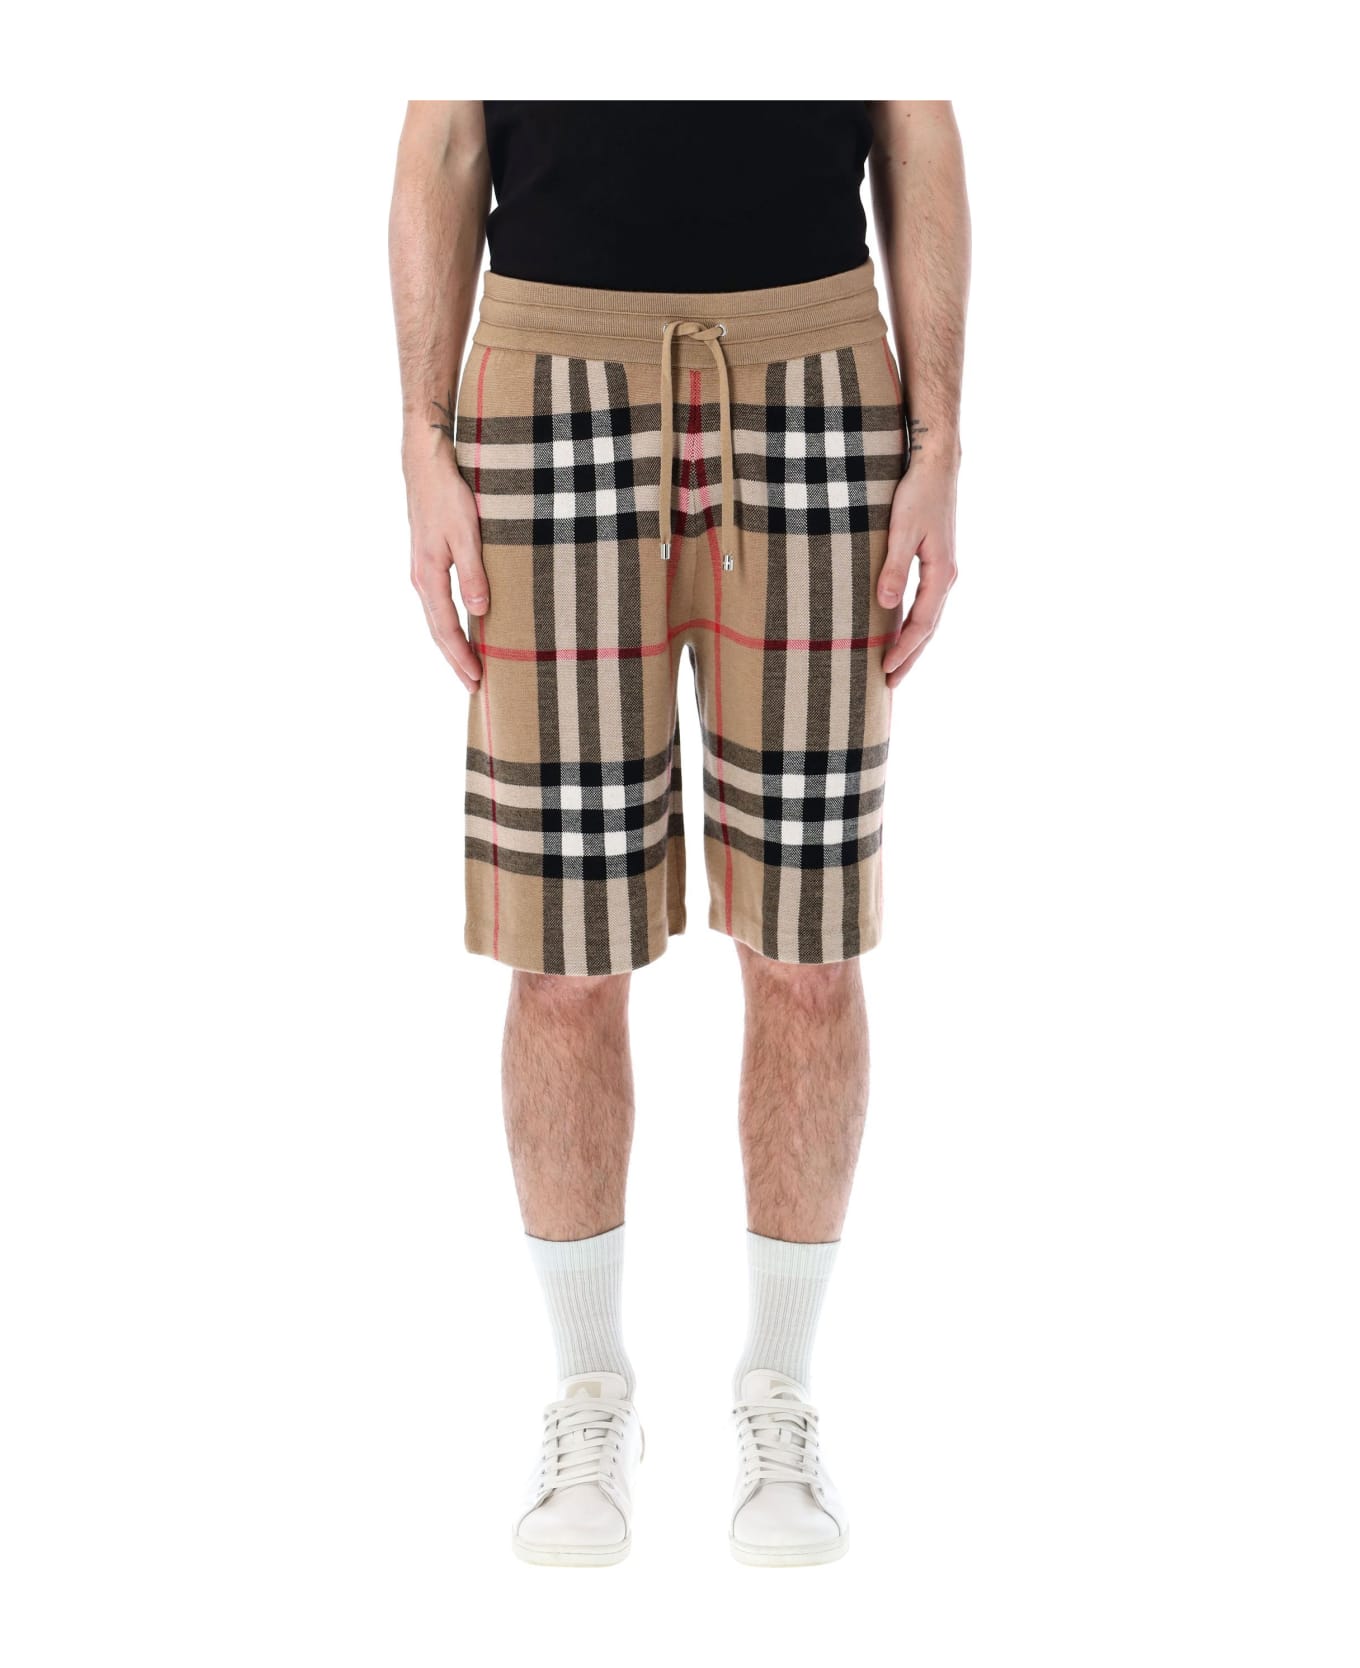 Burberry London Check Shorts - ARCHIVE BEIGE